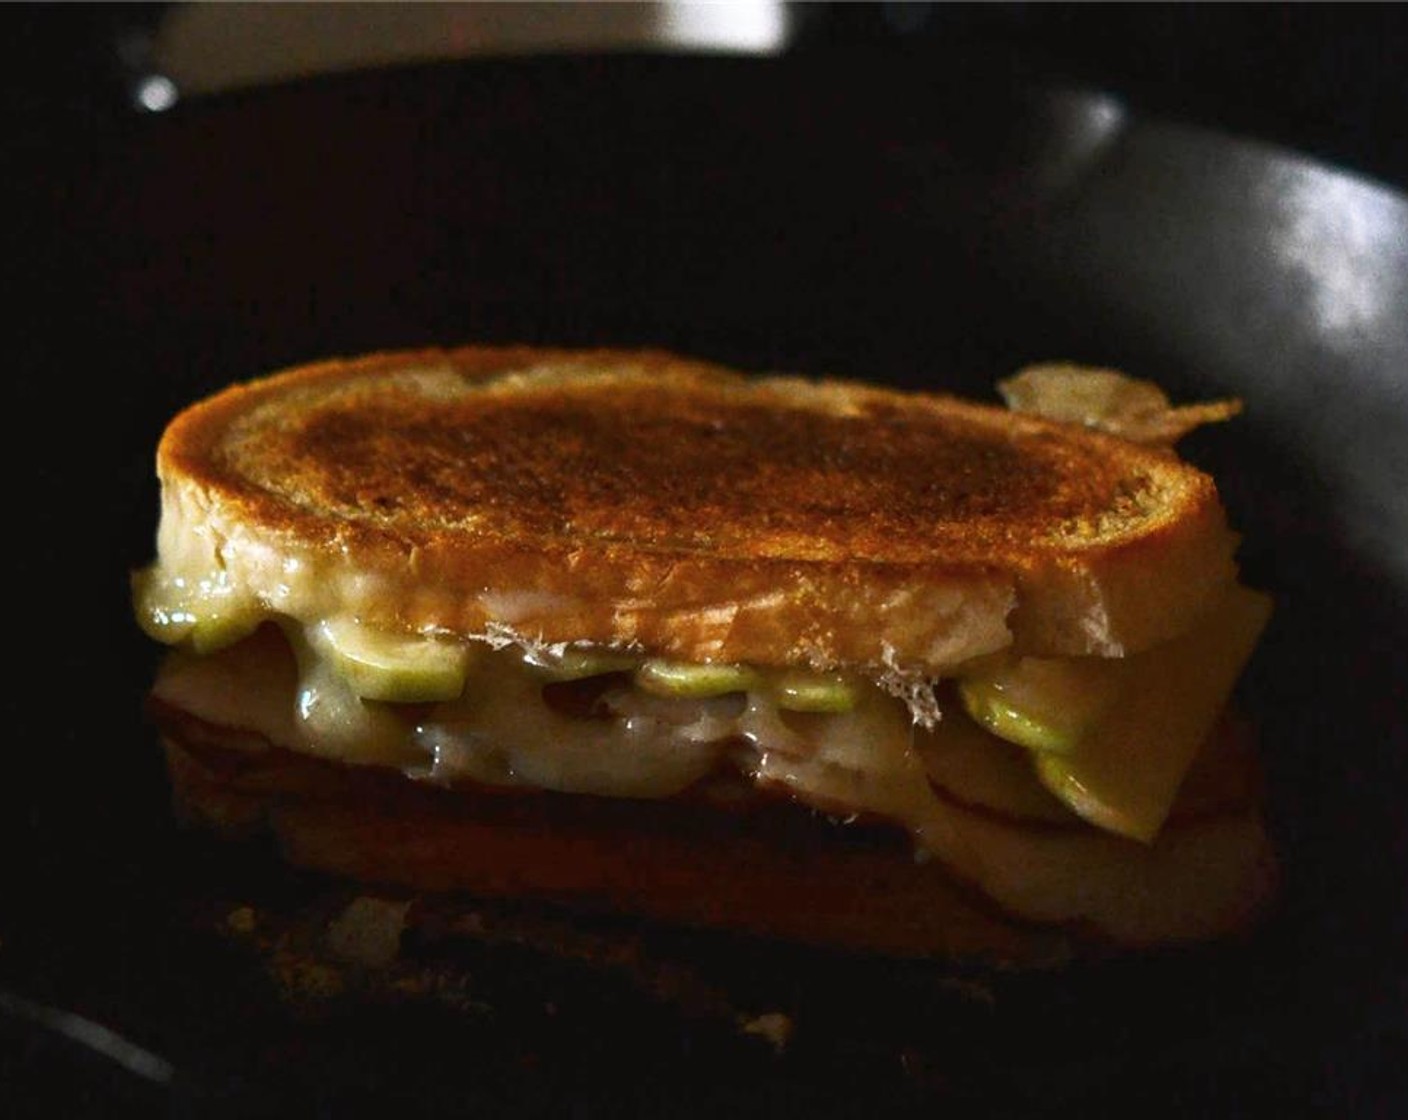 step 6 Cook sandwich on medium low heat until bread becomes lightly toasted and golden brown and the cheese begins to melt. About 5 to 8 minutes per side. If the bread begins to brown too fast, reduce temperature.